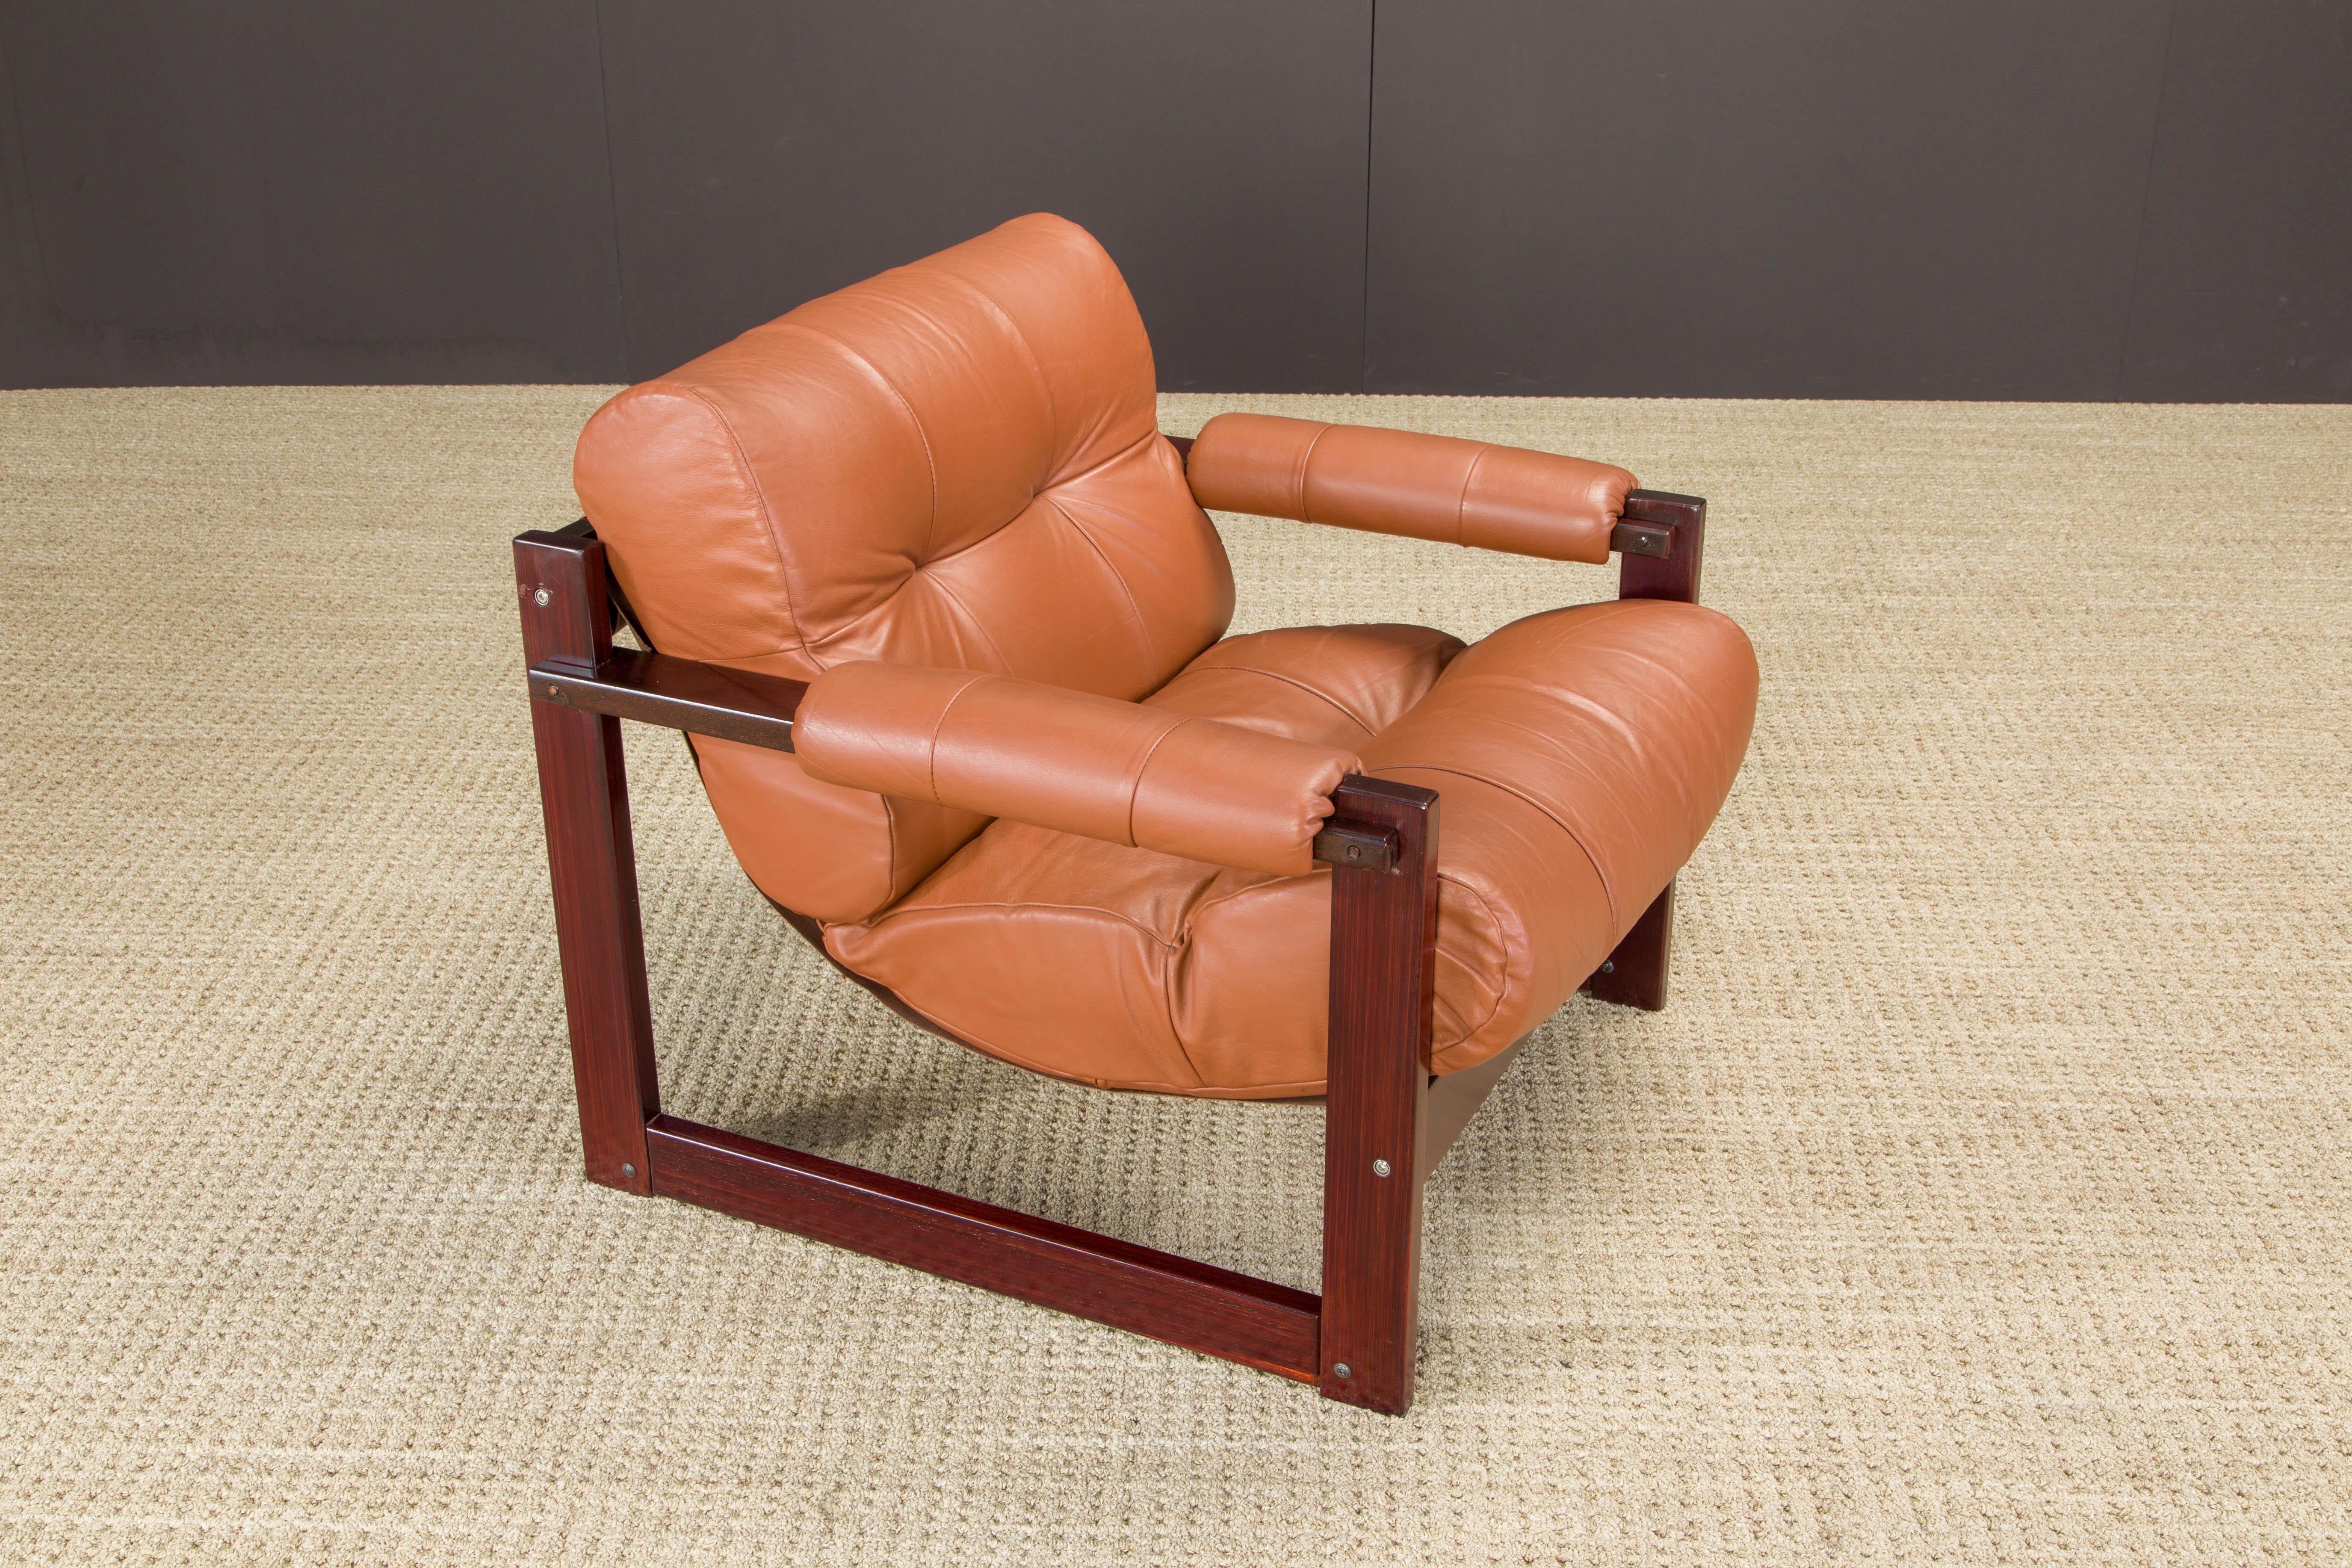 Percival Lafer 'S-1' Rosewood and Leather Lounge Chairs, Brazil, 1976, Signed For Sale 1